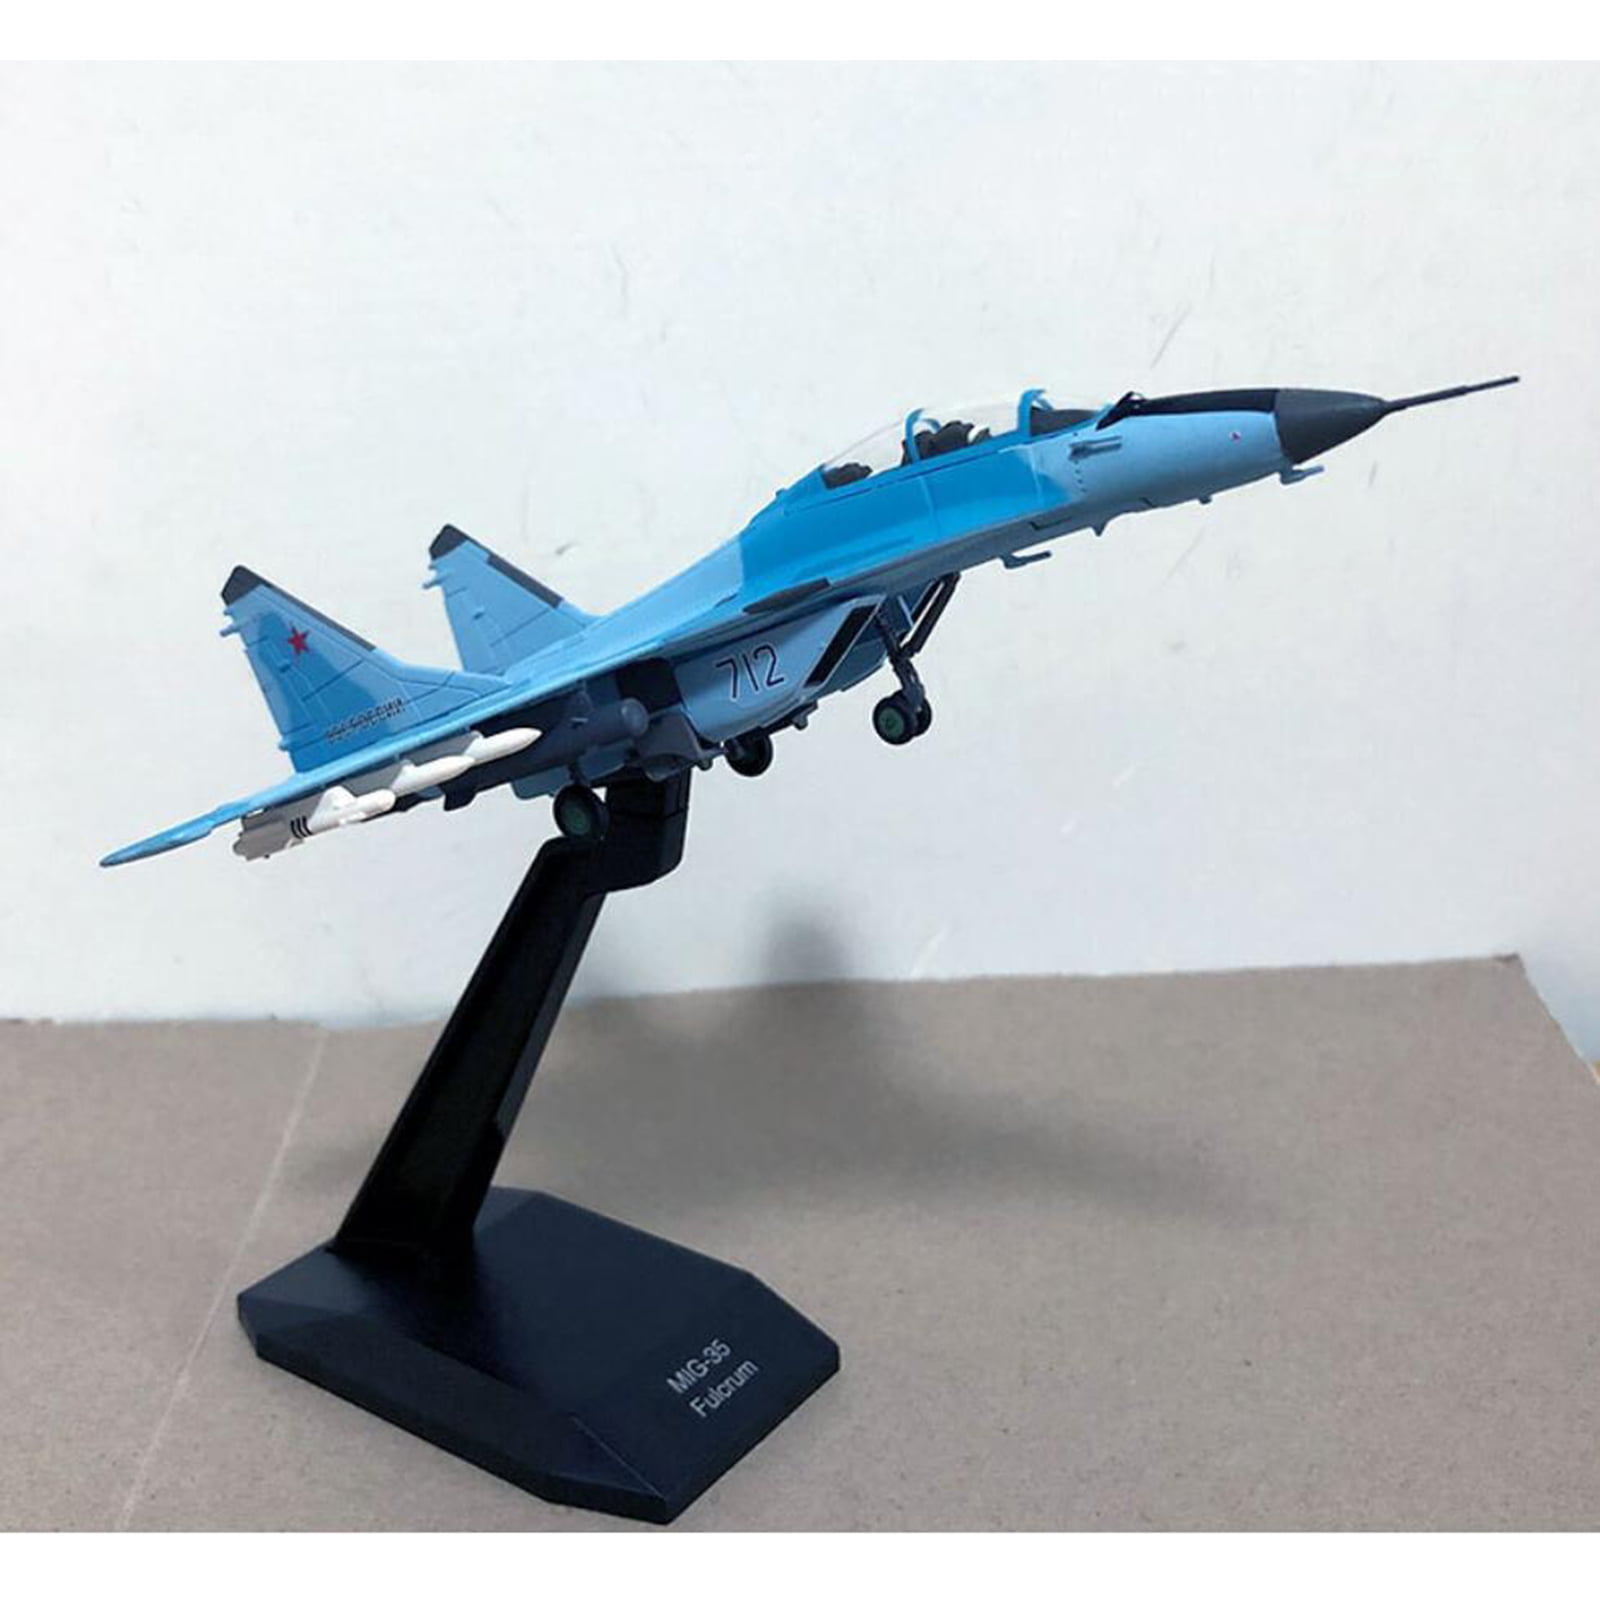 Details about   RUSSIAN MIG-35 Fulcrum  #712 1/100 diecast plane model aircraft